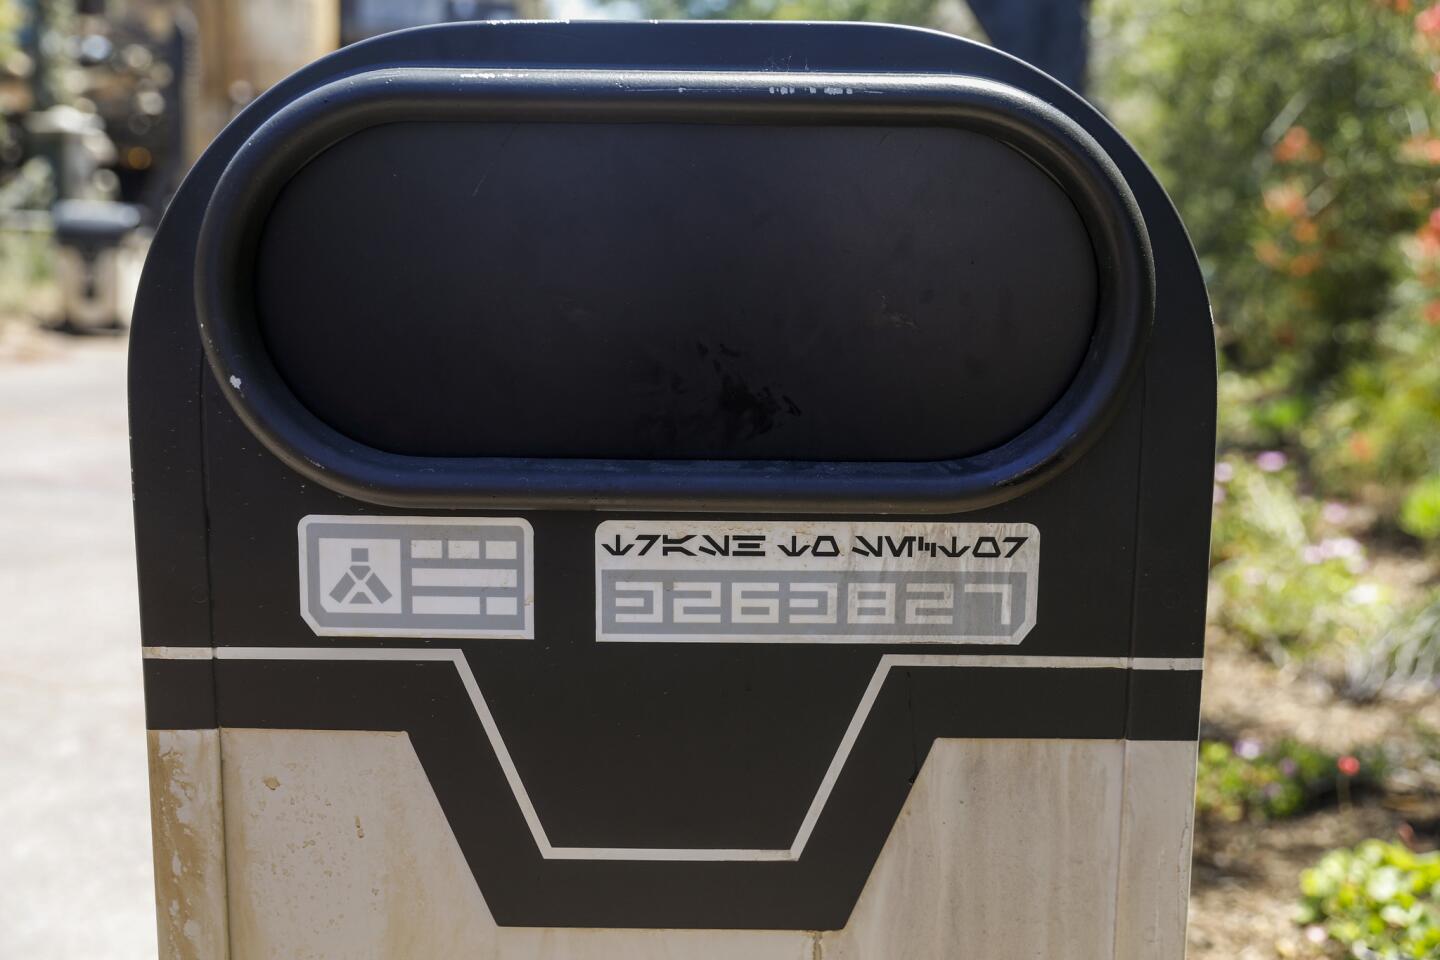 The use of the Batuuan language on garbage cans in Star Wars: Galaxy's Edge.